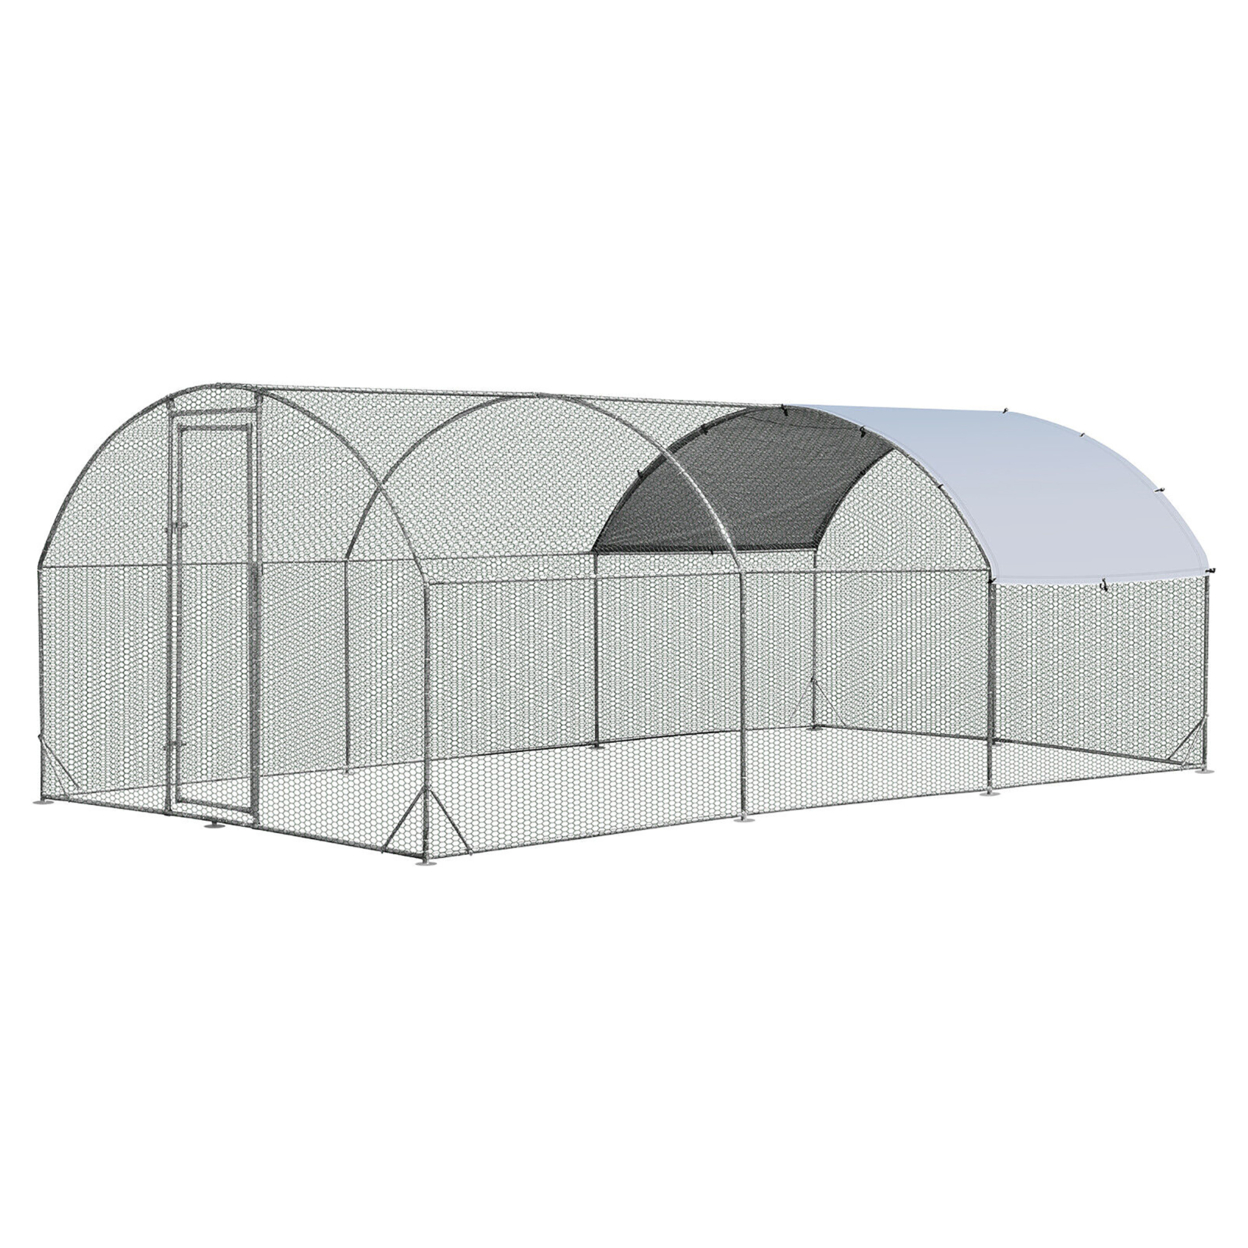 Large Metal Chicken Coop Outdoor Galvanized Dome Cage W/ Cover 9 Ft X 19 Ft